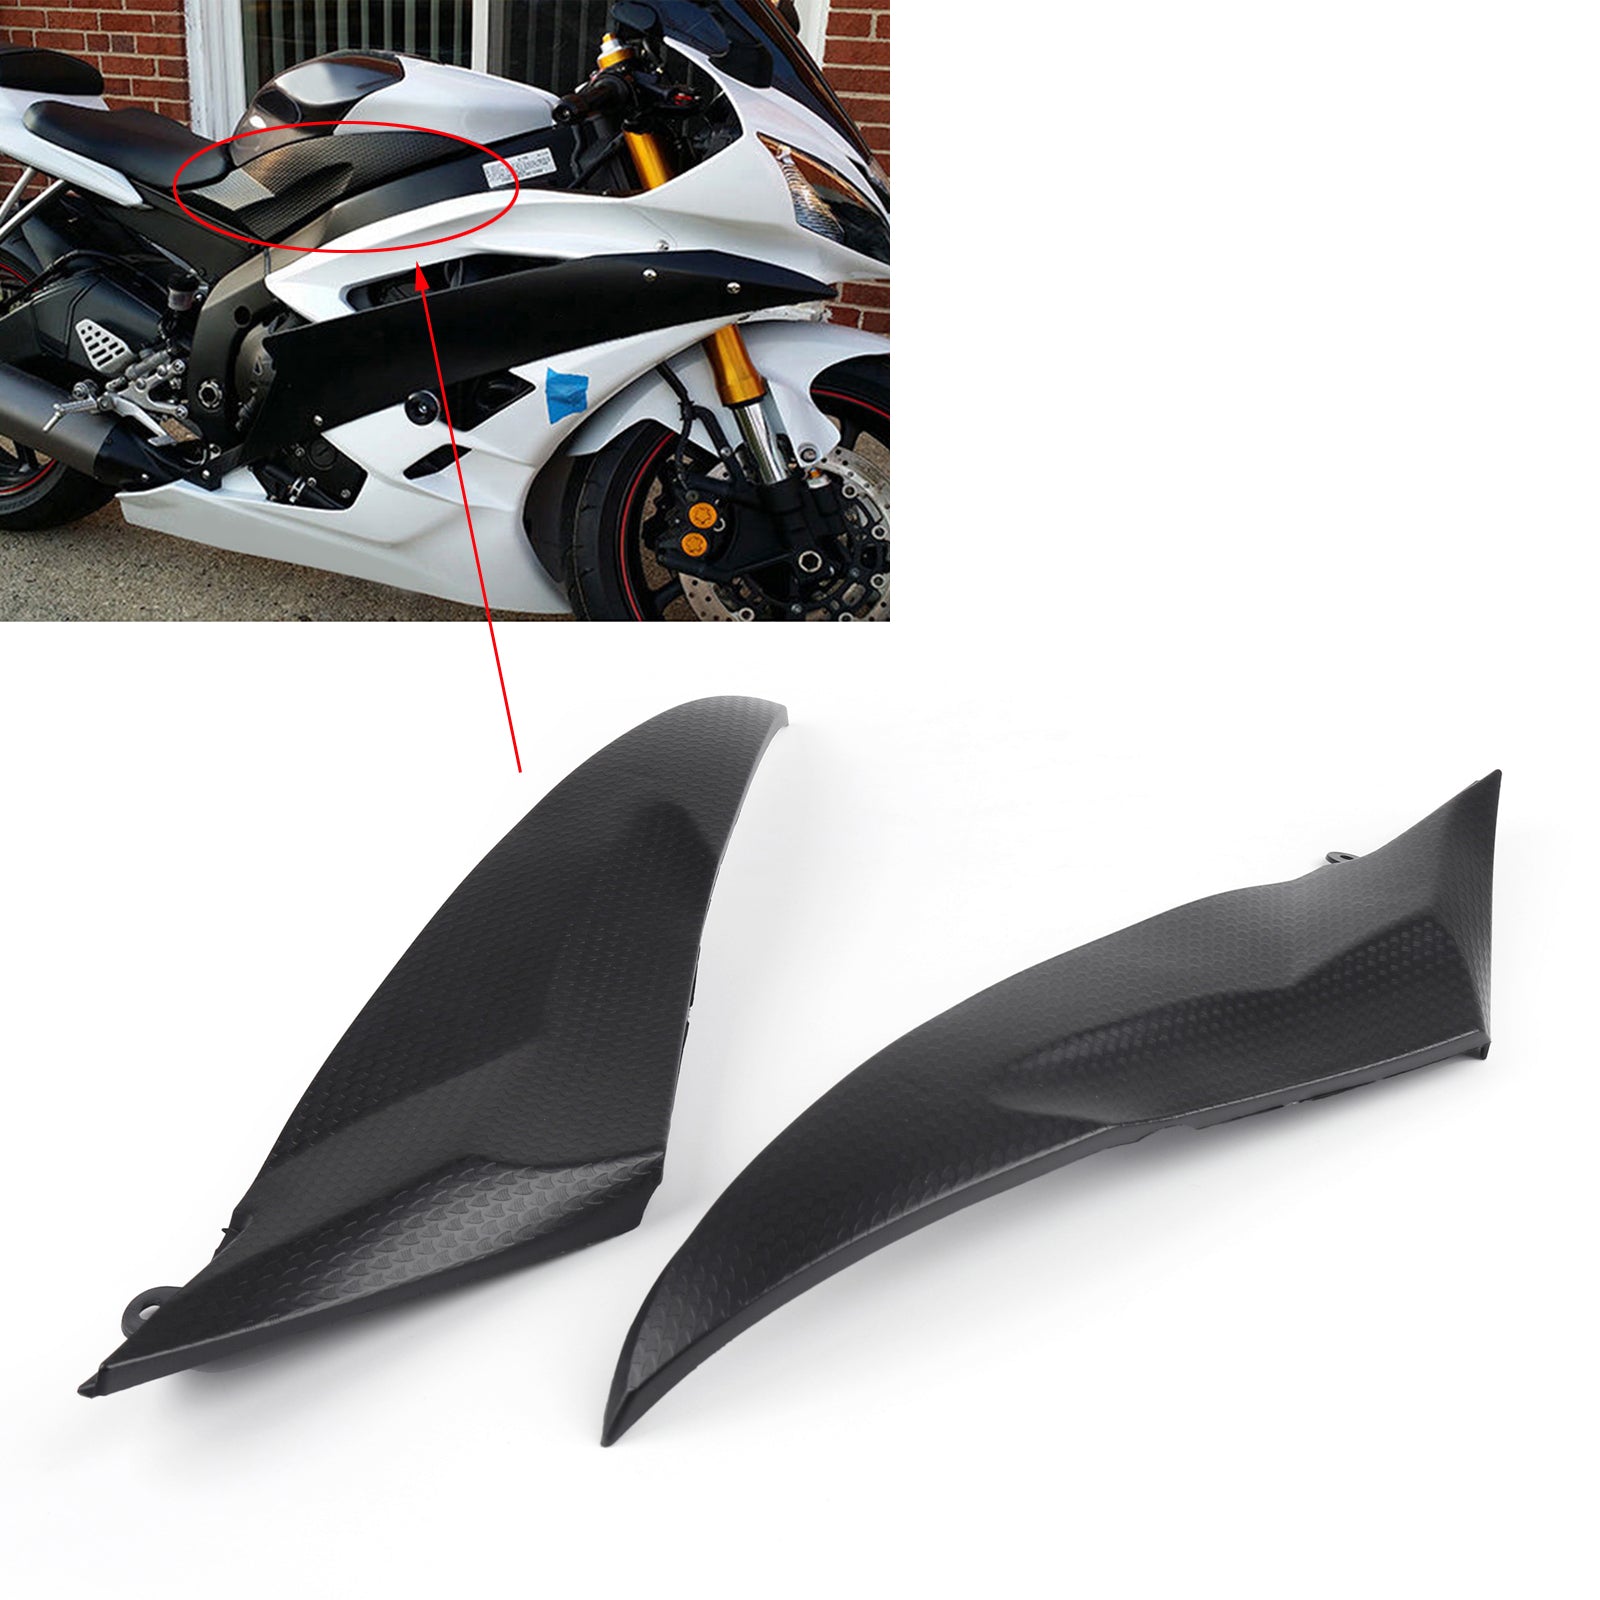 Tank Side Fairing Panel Gas Tank Cover For Yamaha 2006 2007 YZF R6 2006-2007 Generic